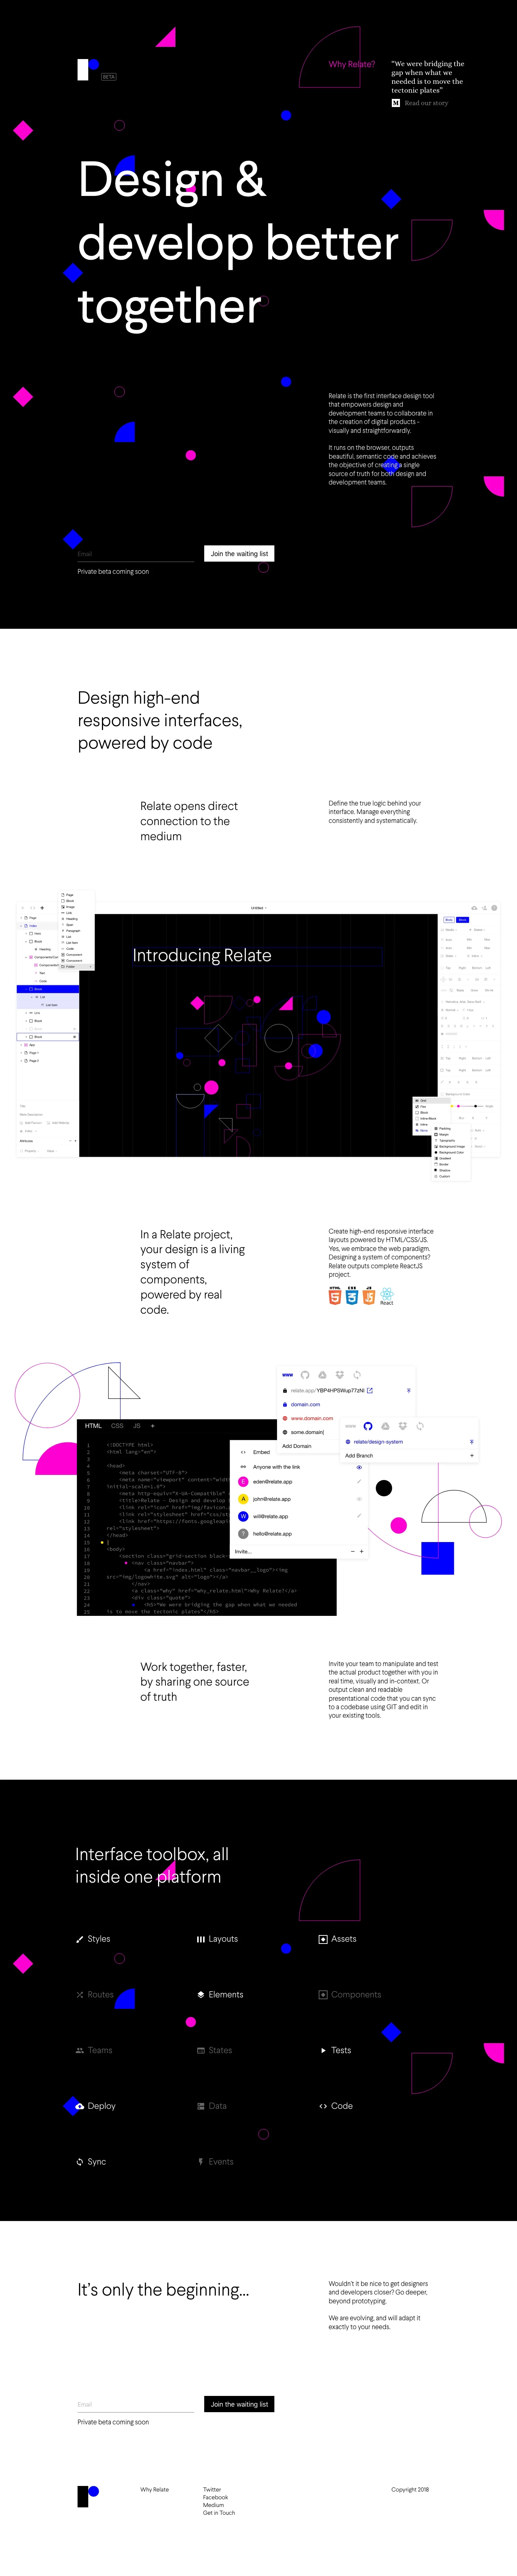 Relate Landing Page Example: Relate is the first interface design tool that empowers design and development teams to collaborate in the creation of digital products - visually and straightforwardly